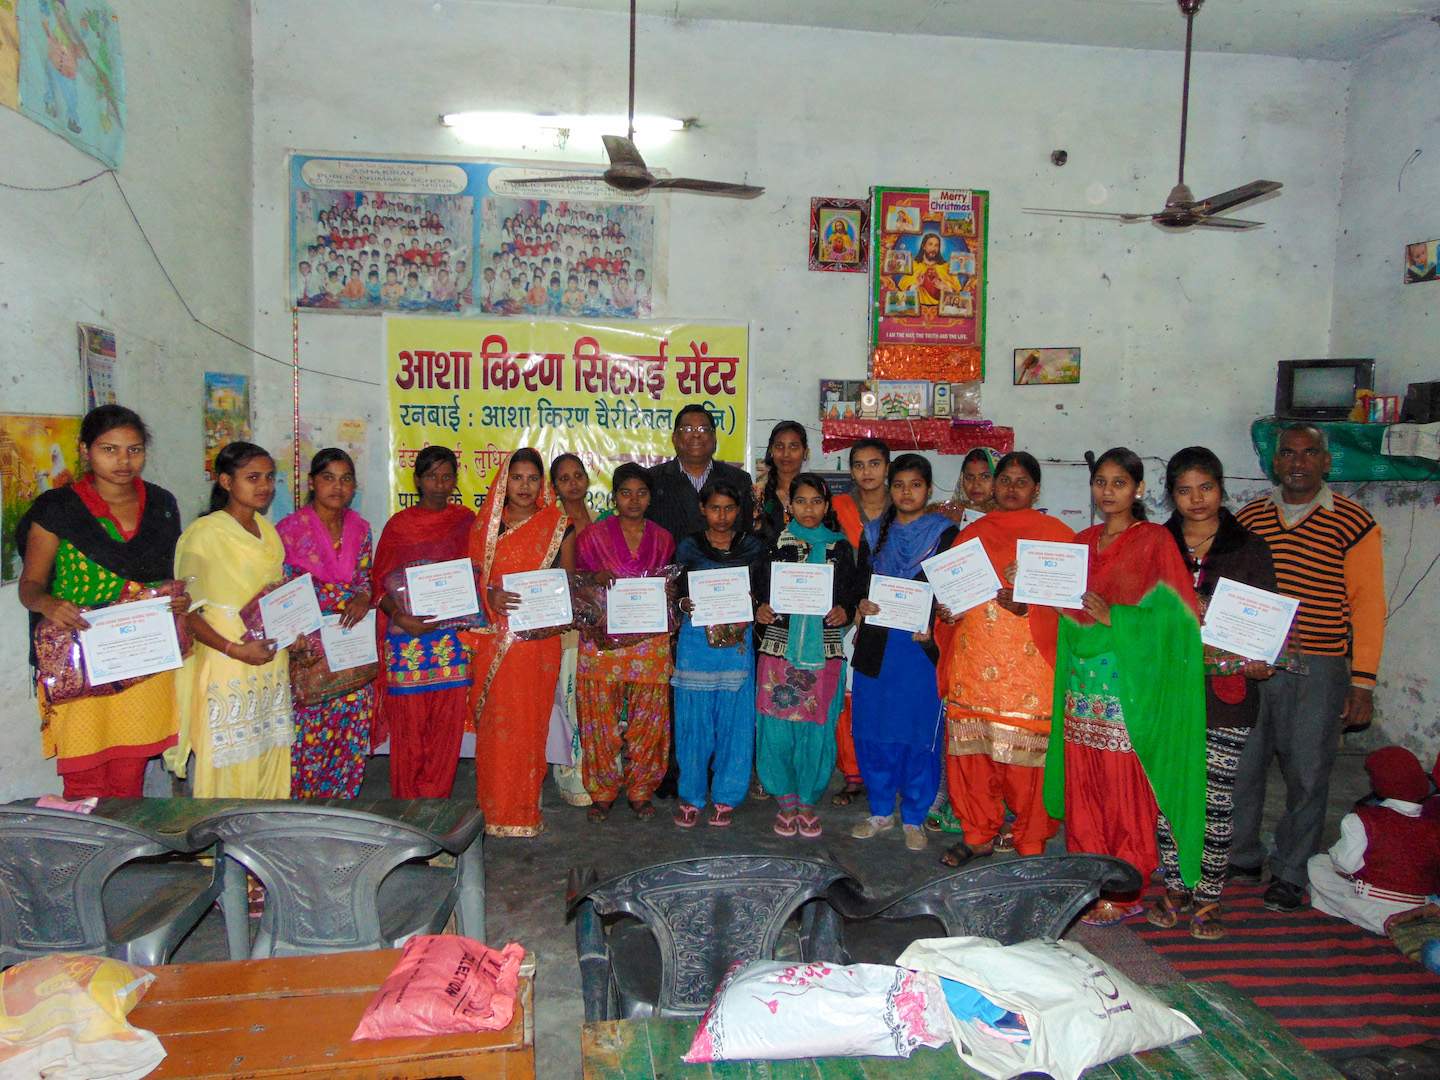 A group of women display their certificates after completing their sewing course and learning to manage money.